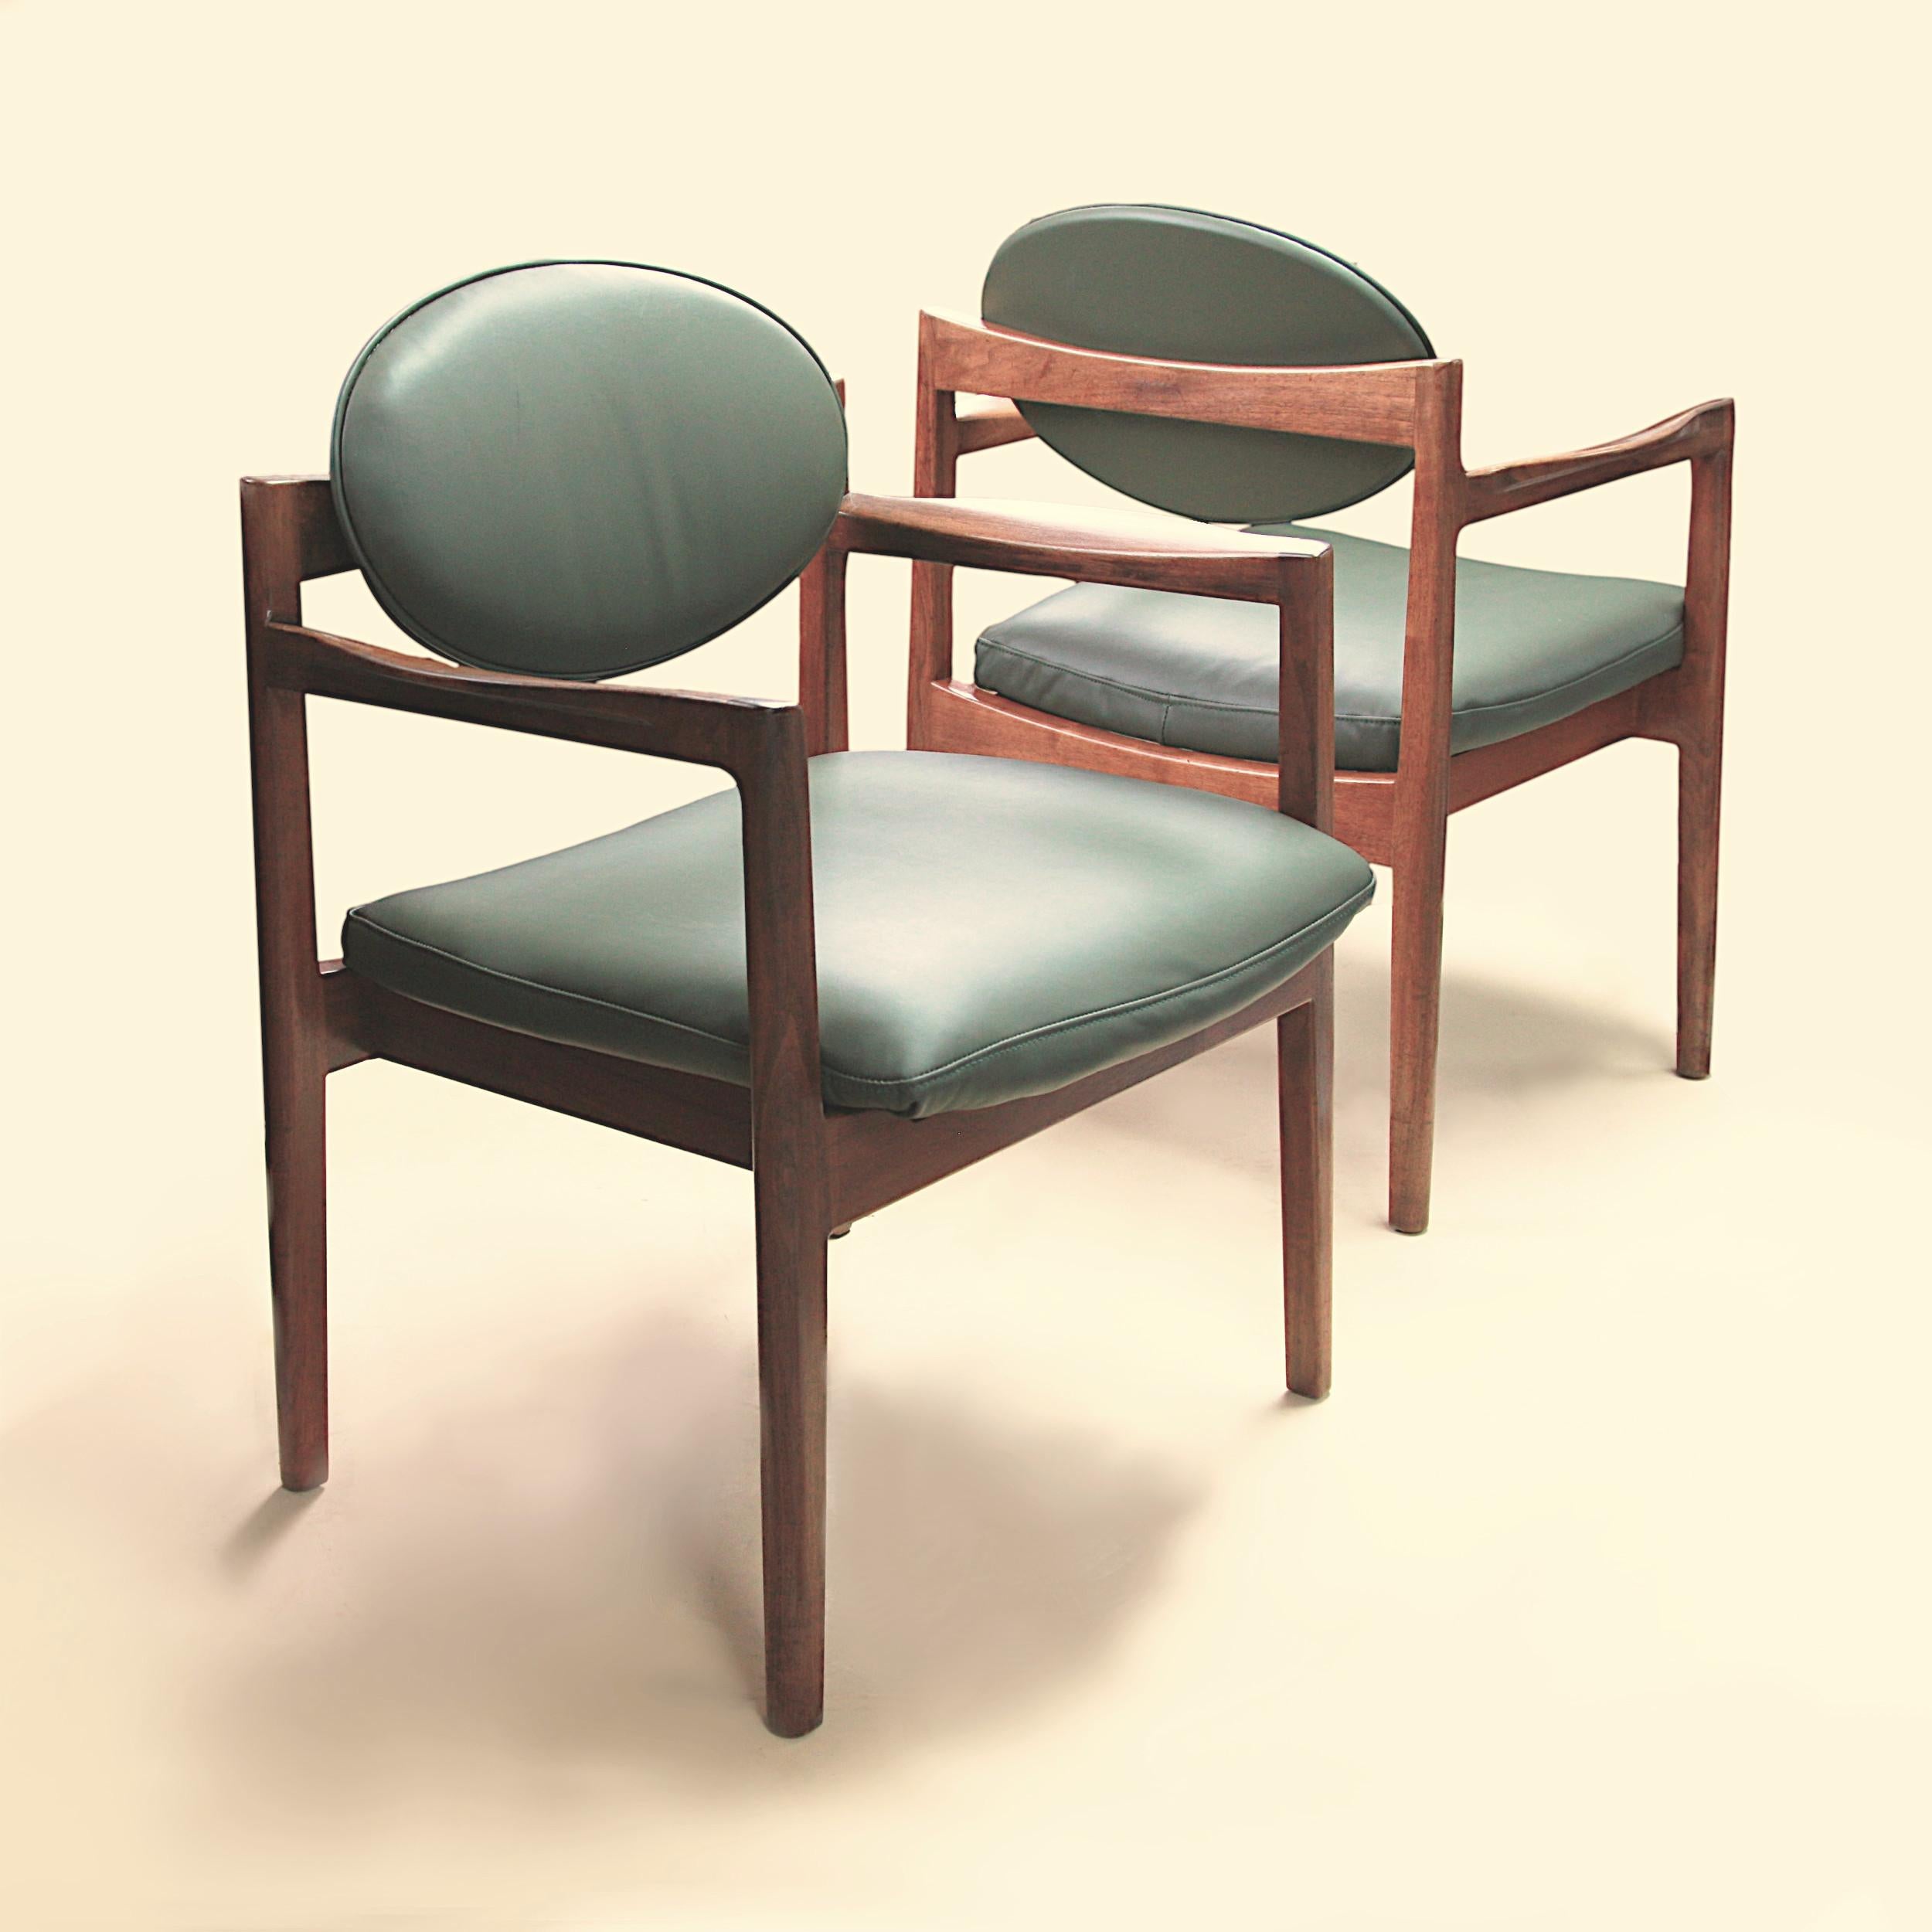 A fantastic pair of Mid-Century Modern green leather and walnut club chairs by Danish American designer Jens Risom. From the 1960s, these chairs are in very nice vintage condition. Chairs feature a gorgeous, sculptural design, beautifully